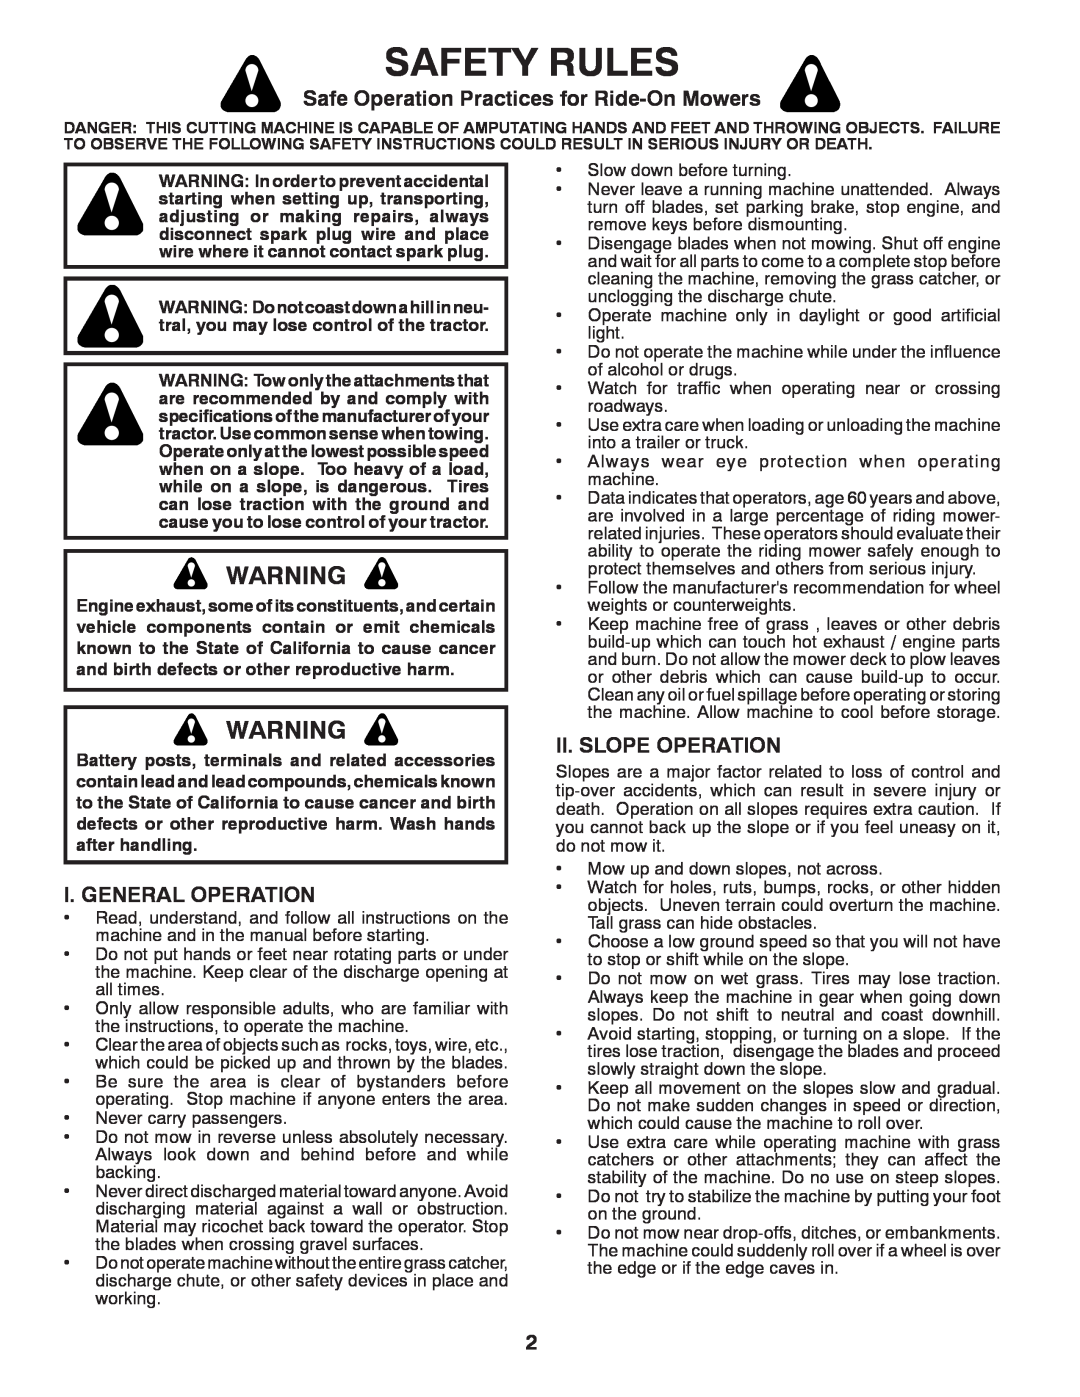 Poulan 438706 manual Safety Rules, Safe Operation Practices for Ride-On Mowers, I. General Operation, Ii. Slope Operation 